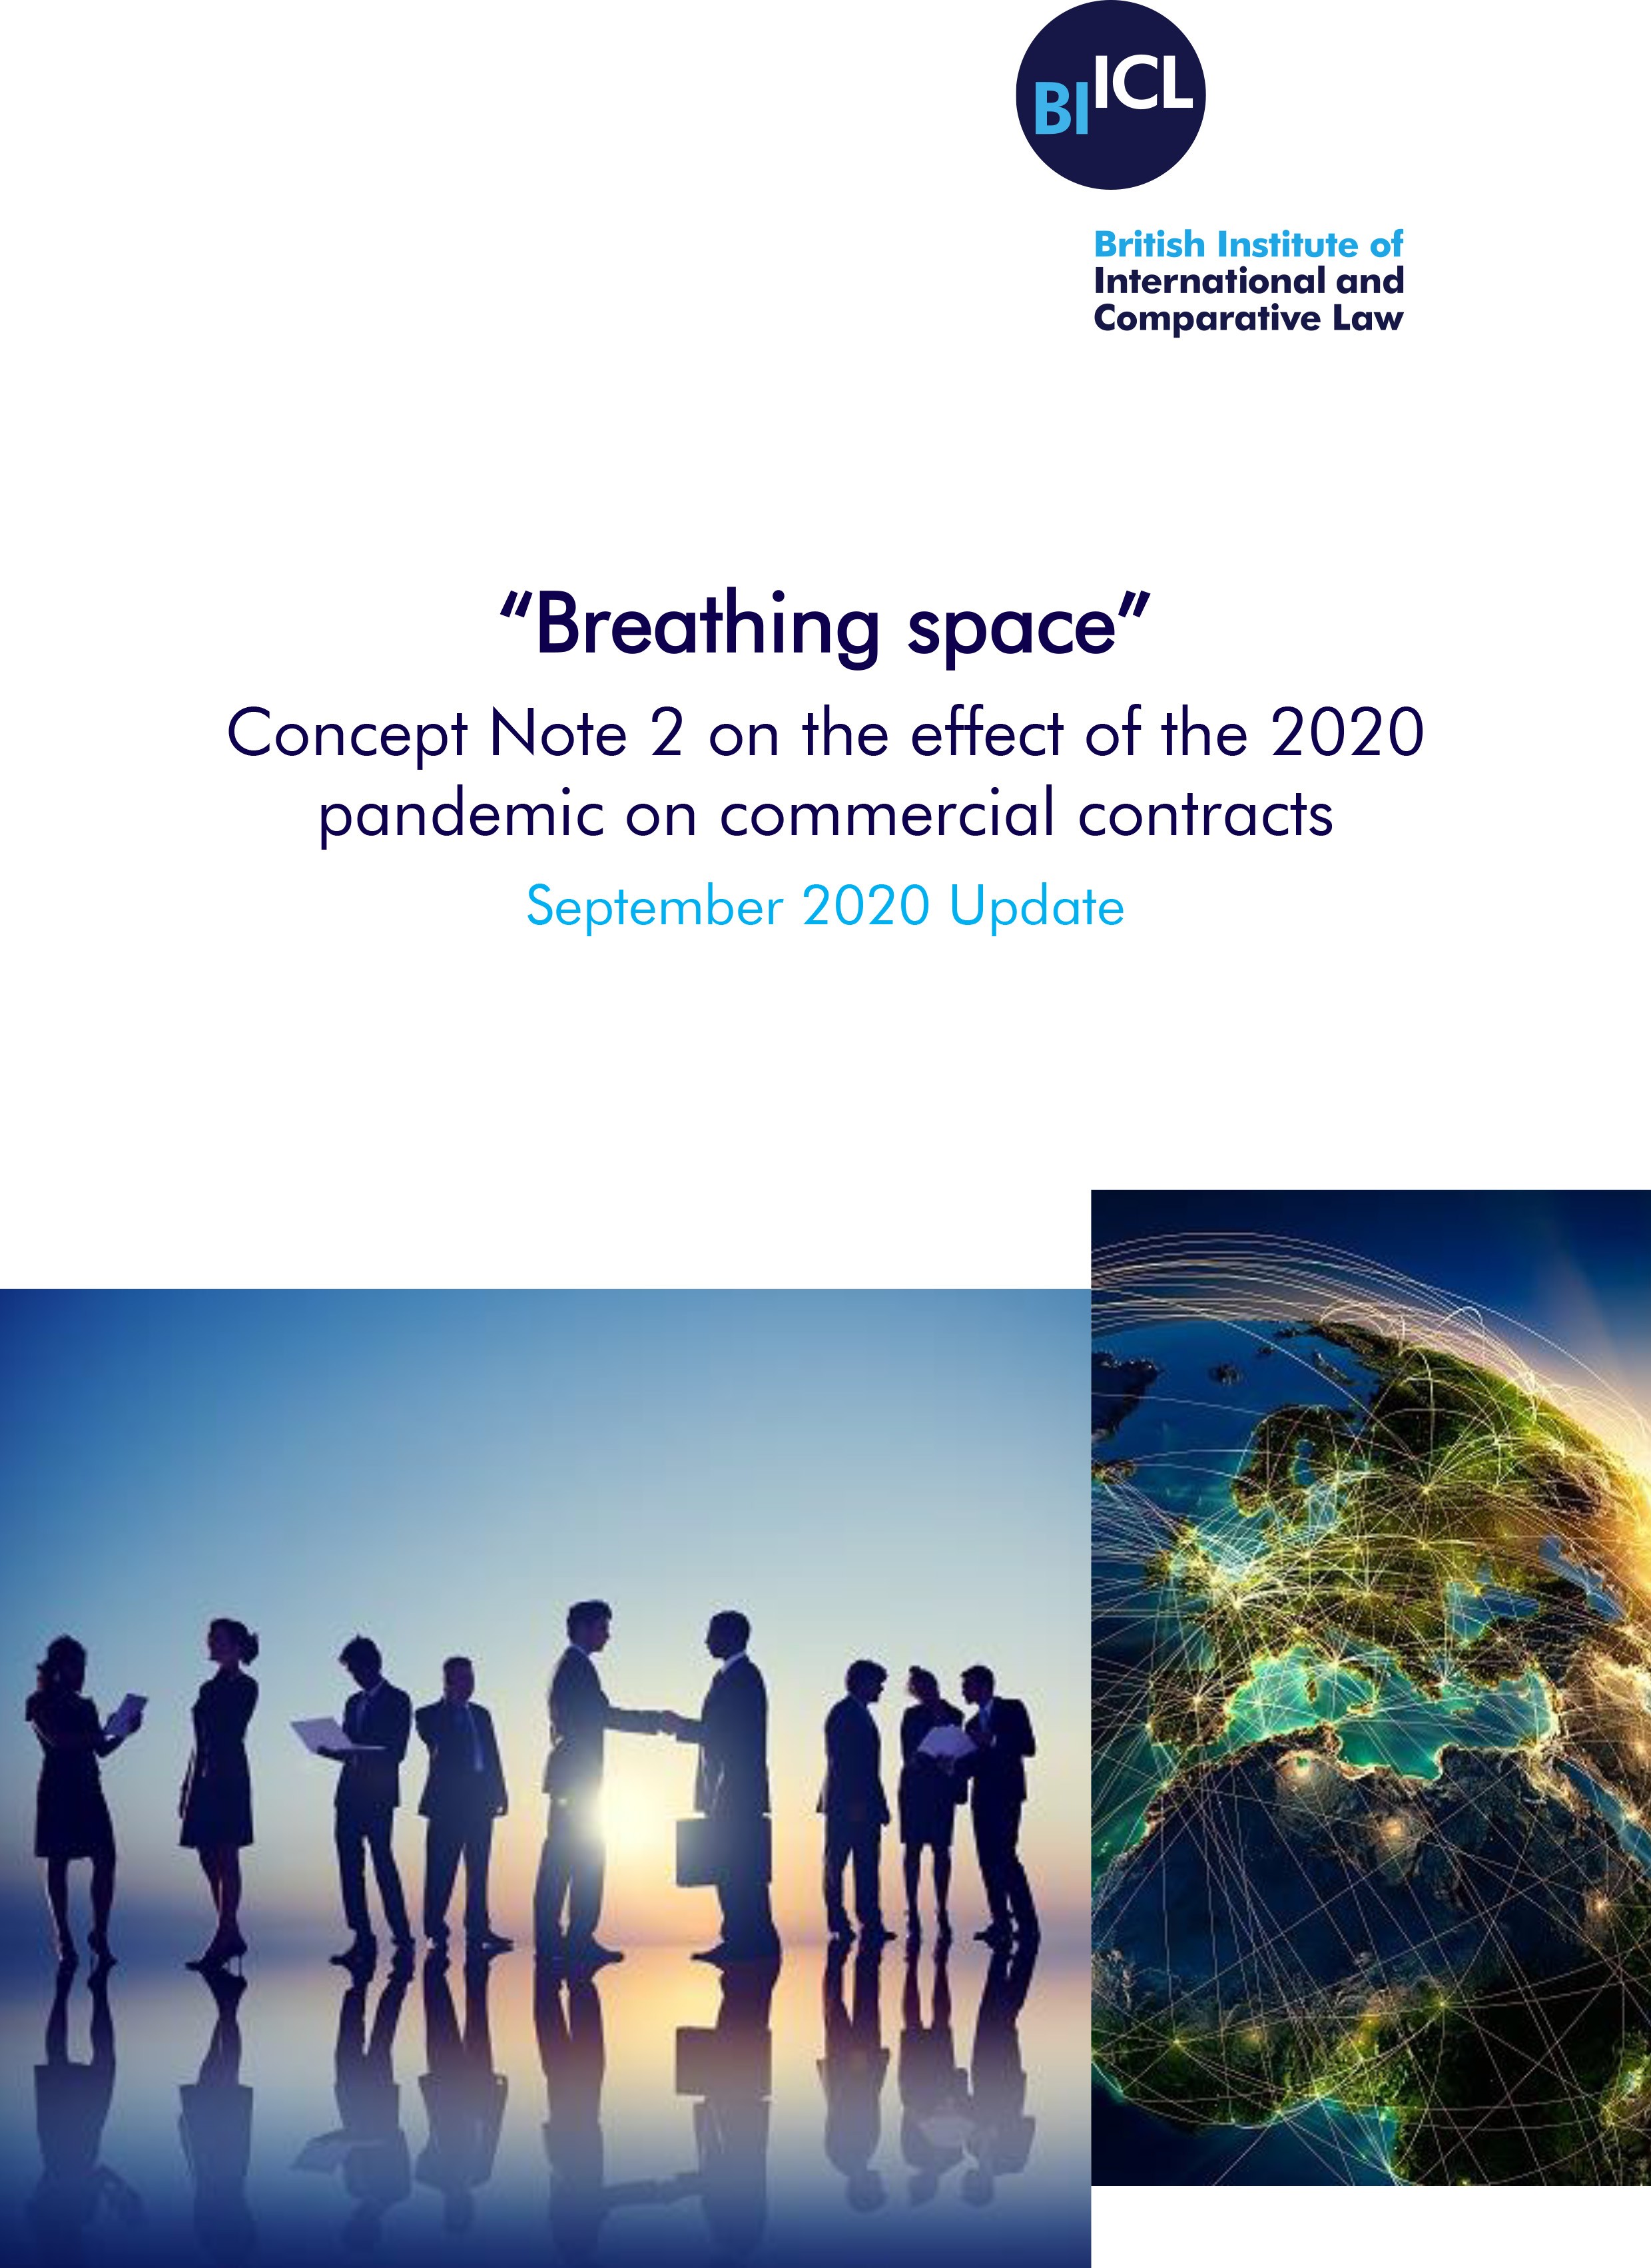 Breathing space concept note 2